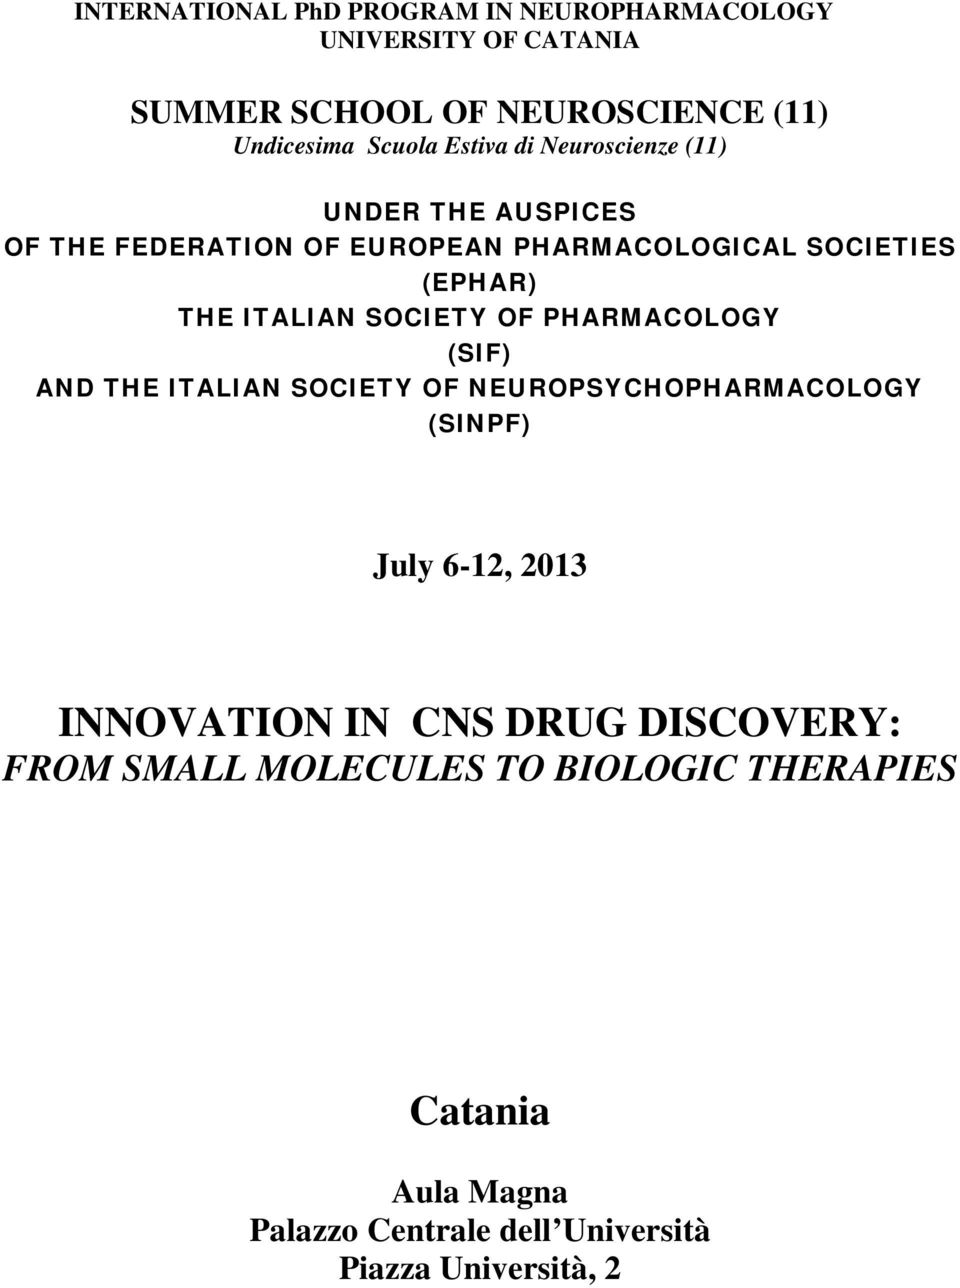 SOCIETY OF PHARMACOLOGY (SIF) AND THE ITALIAN SOCIETY OF NEUROPSYCHOPHARMACOLOGY (SINPF) July 6-12, 2013 INNOVATION IN CNS